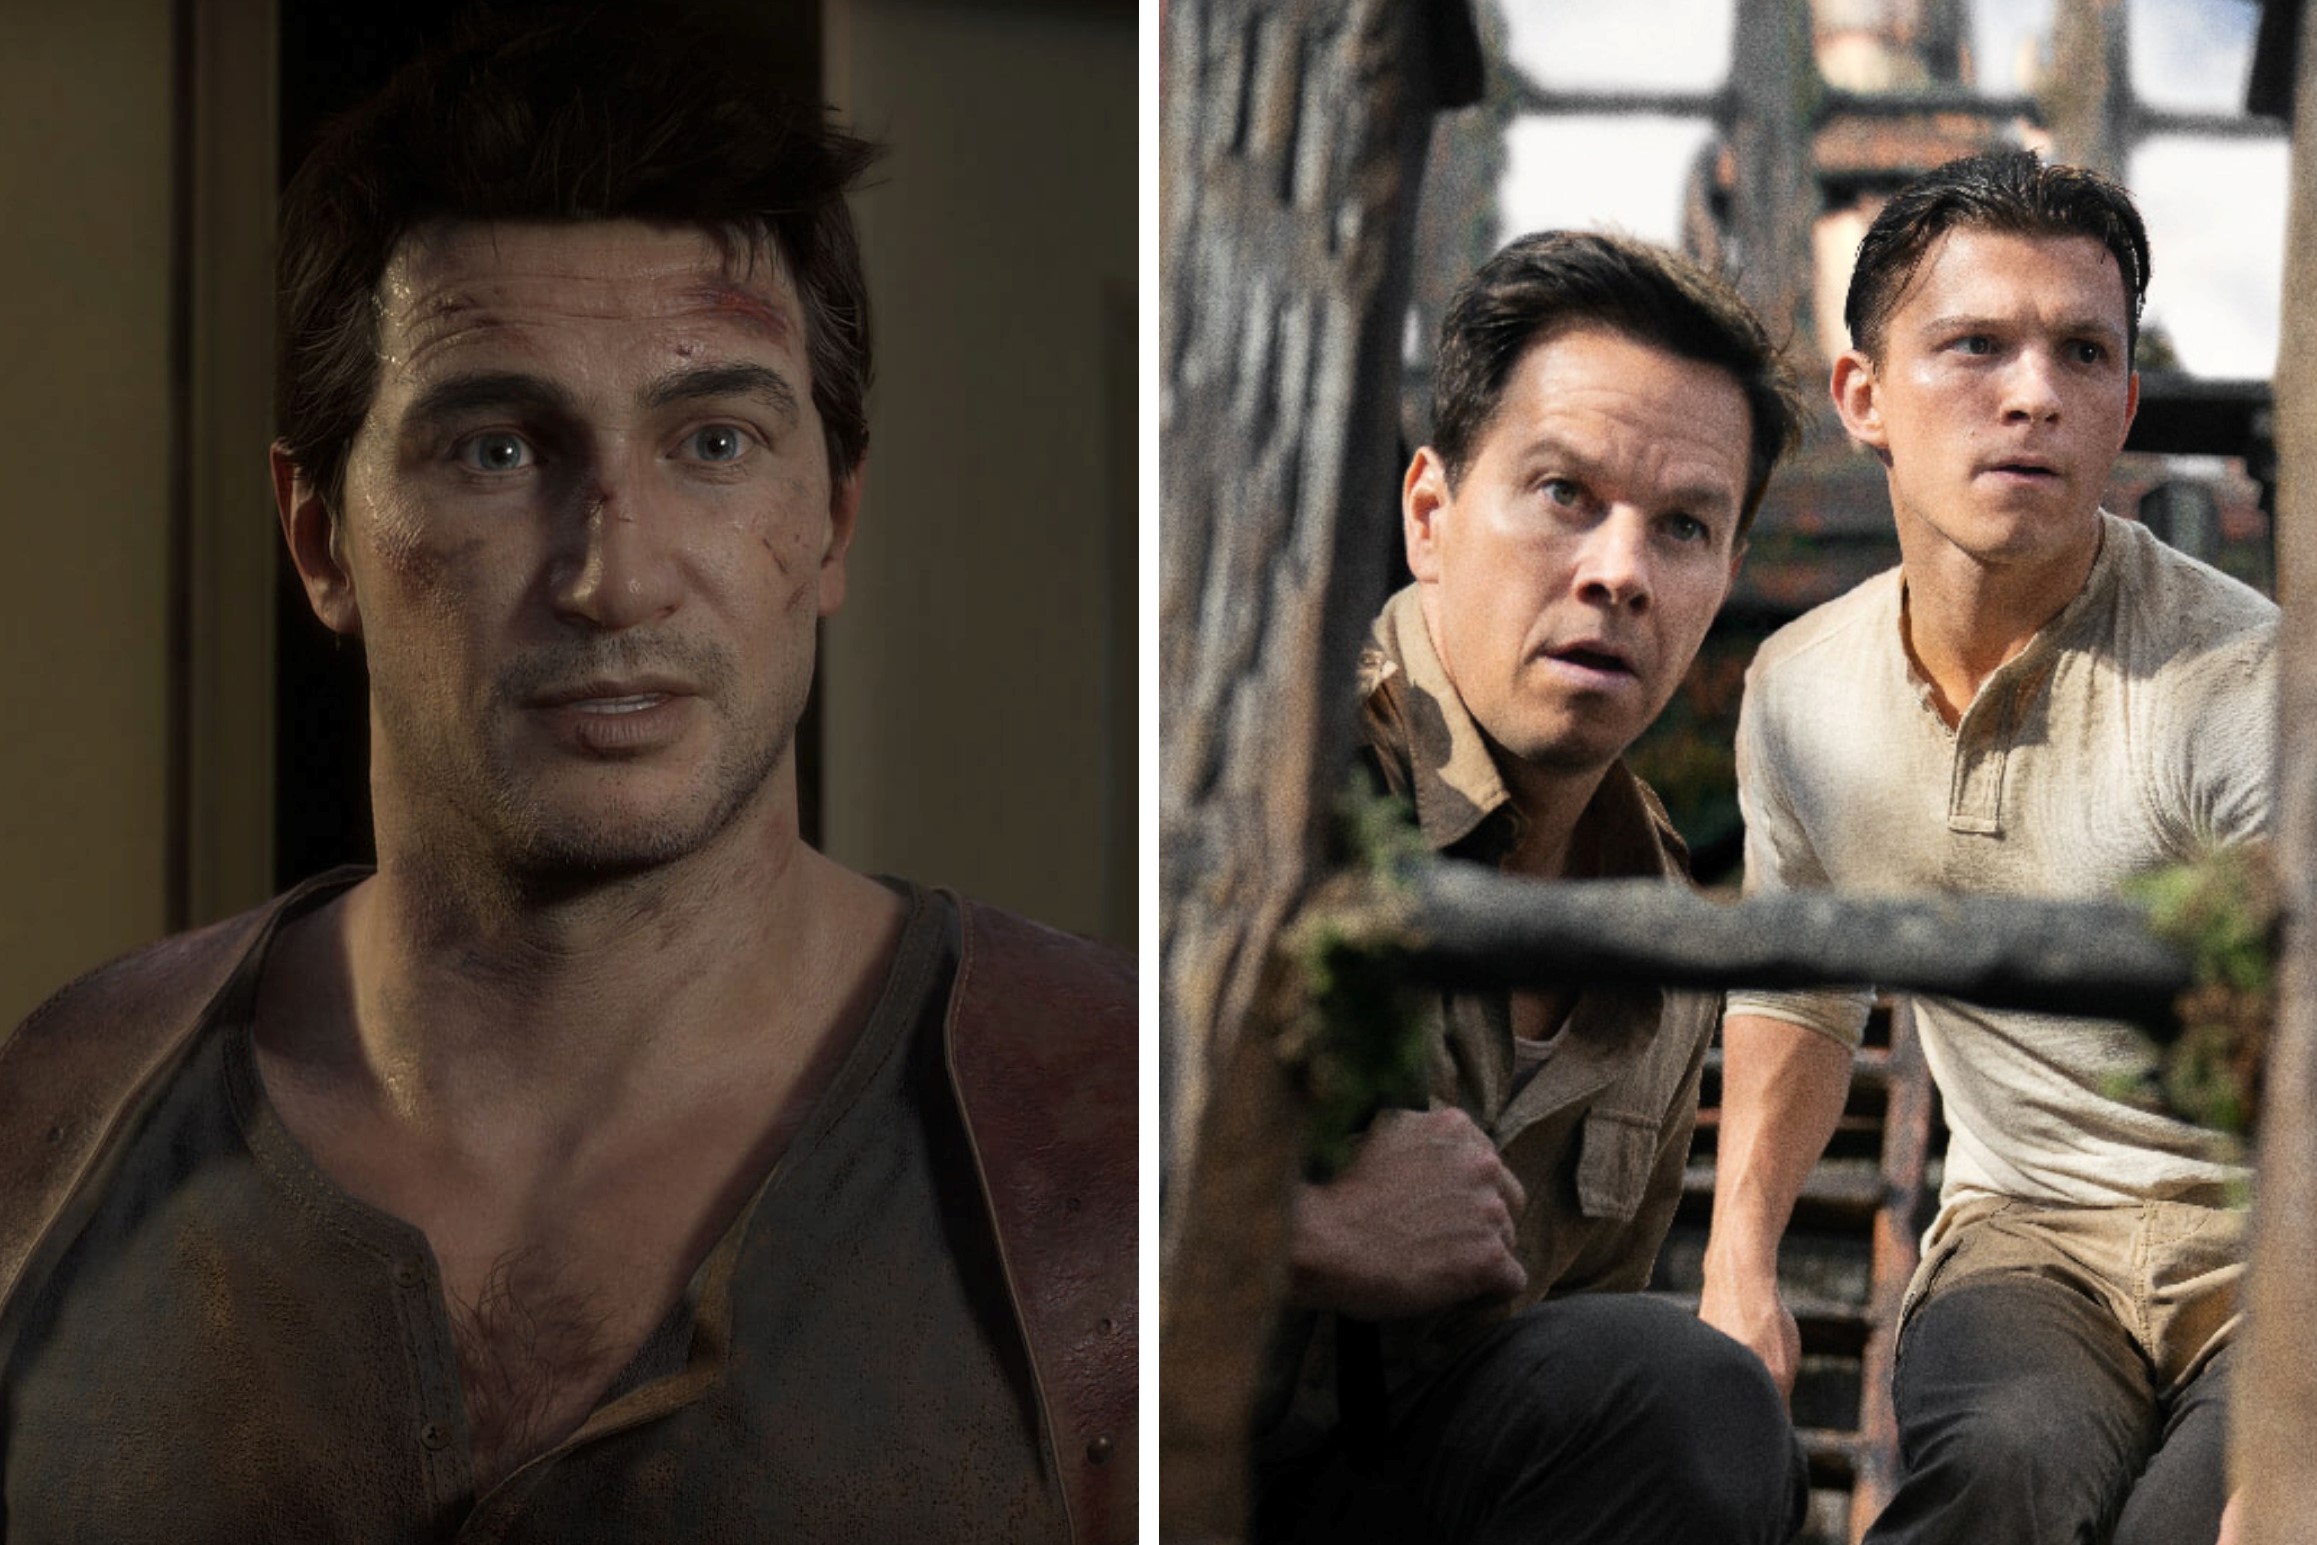 The Original Nathan Drake Makes a Cameo in the 'Uncharted' Film